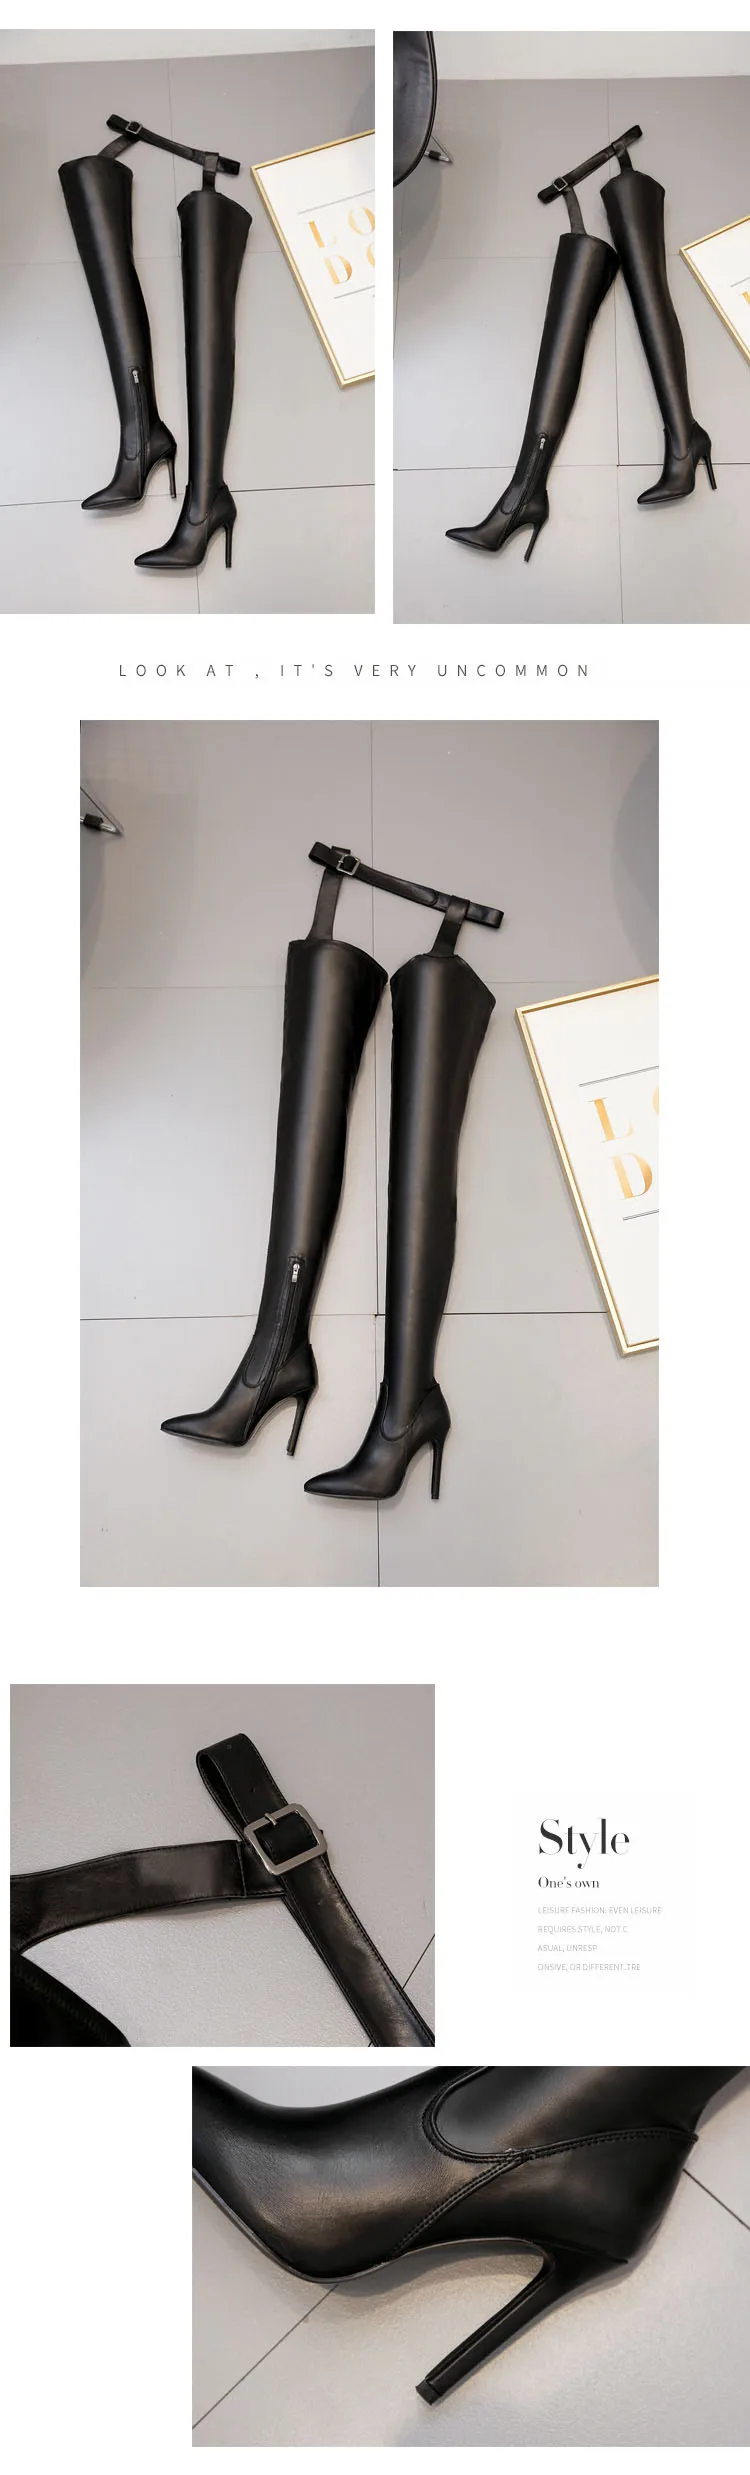 Plus Size 42 Leather Over The Knee High Boots Women Black Sexy Pants Boots One Boots Catwalk Women's Shoes thigh high boots